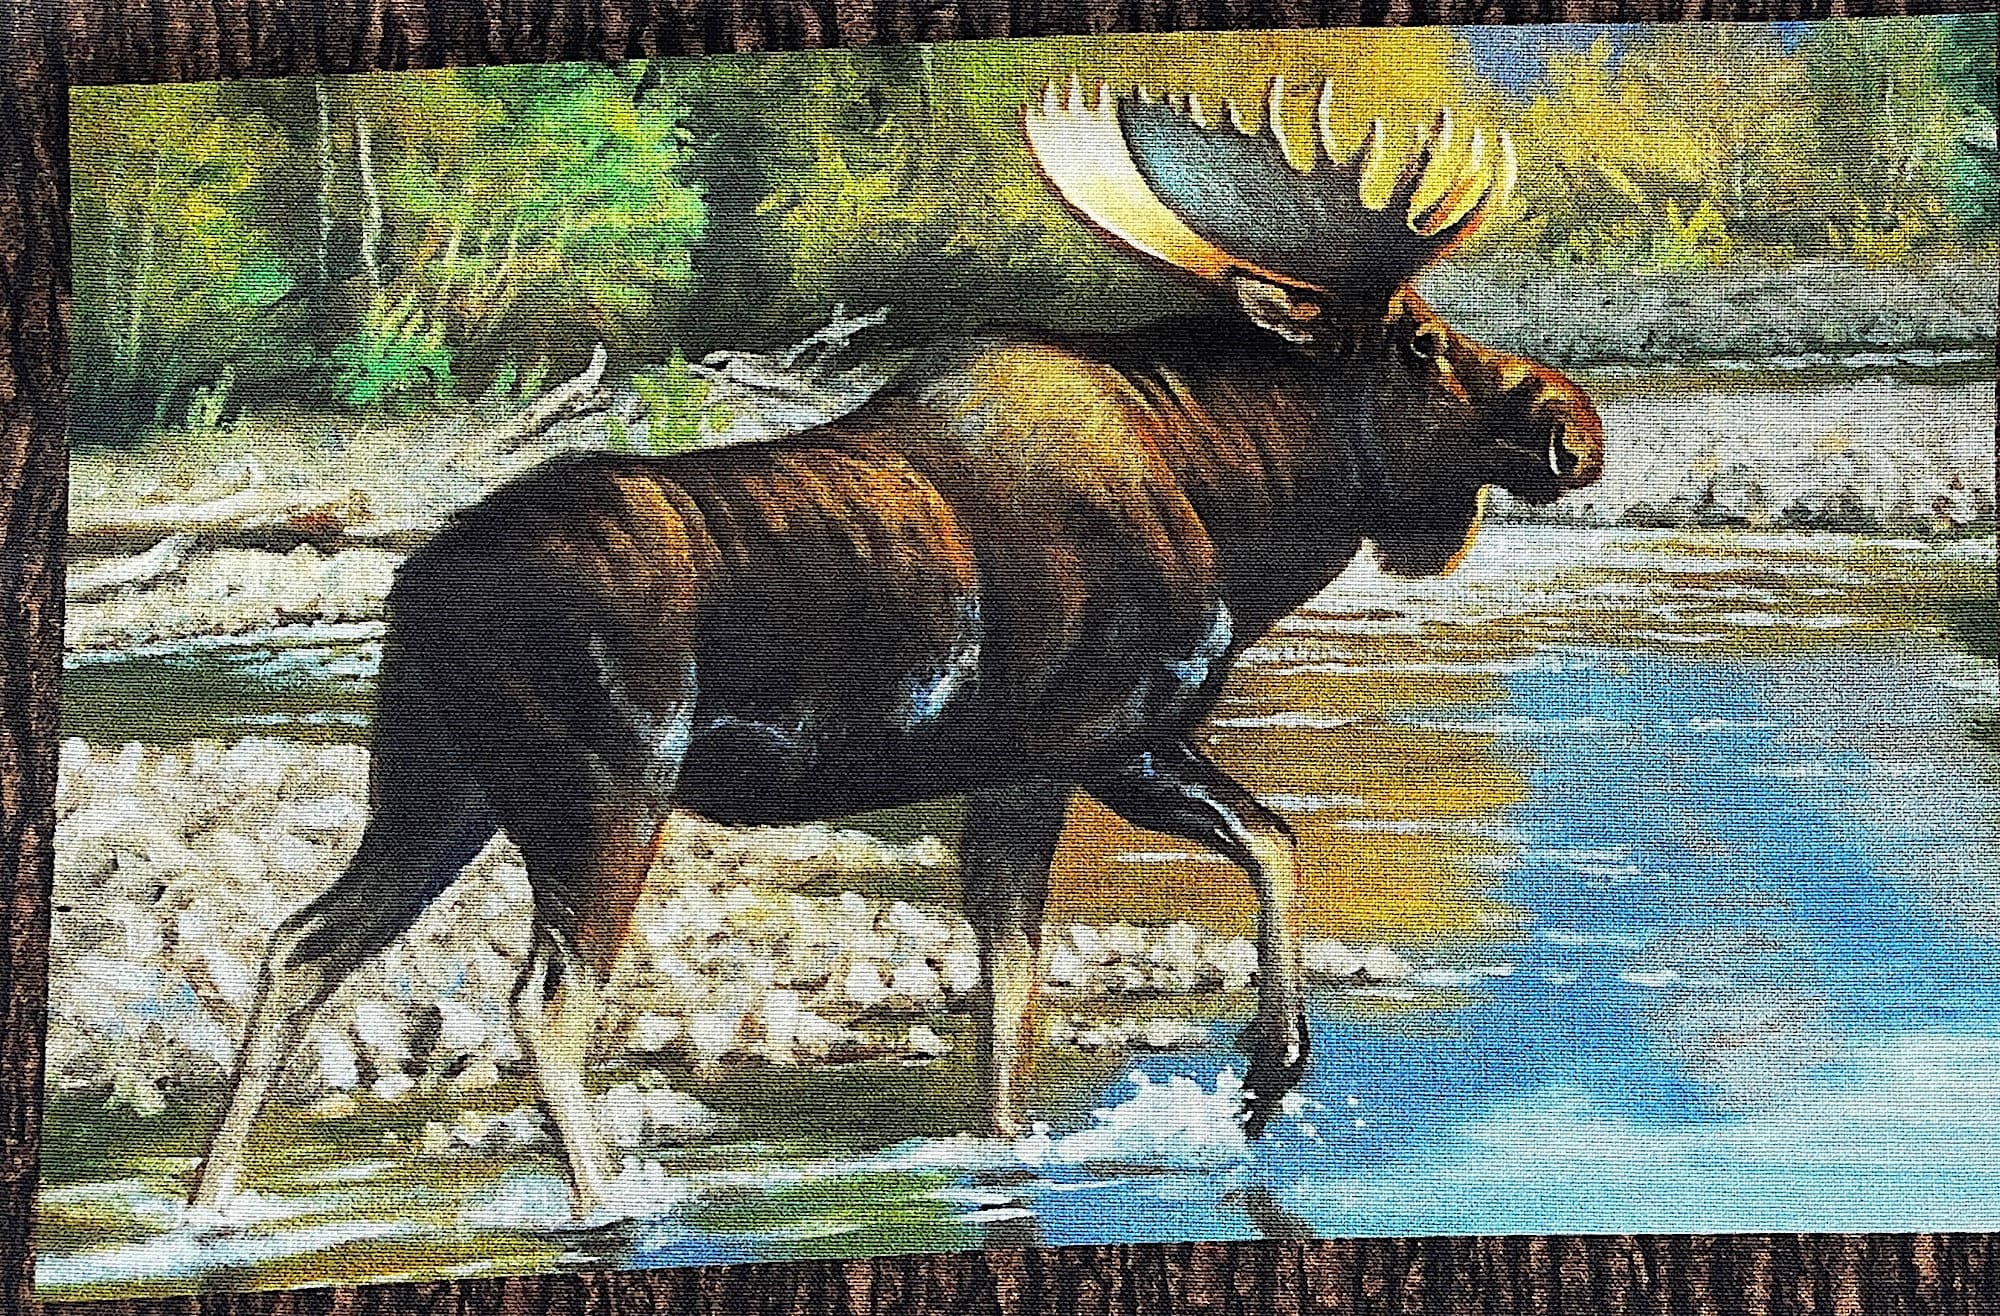 Close up of a moose walking in the water.